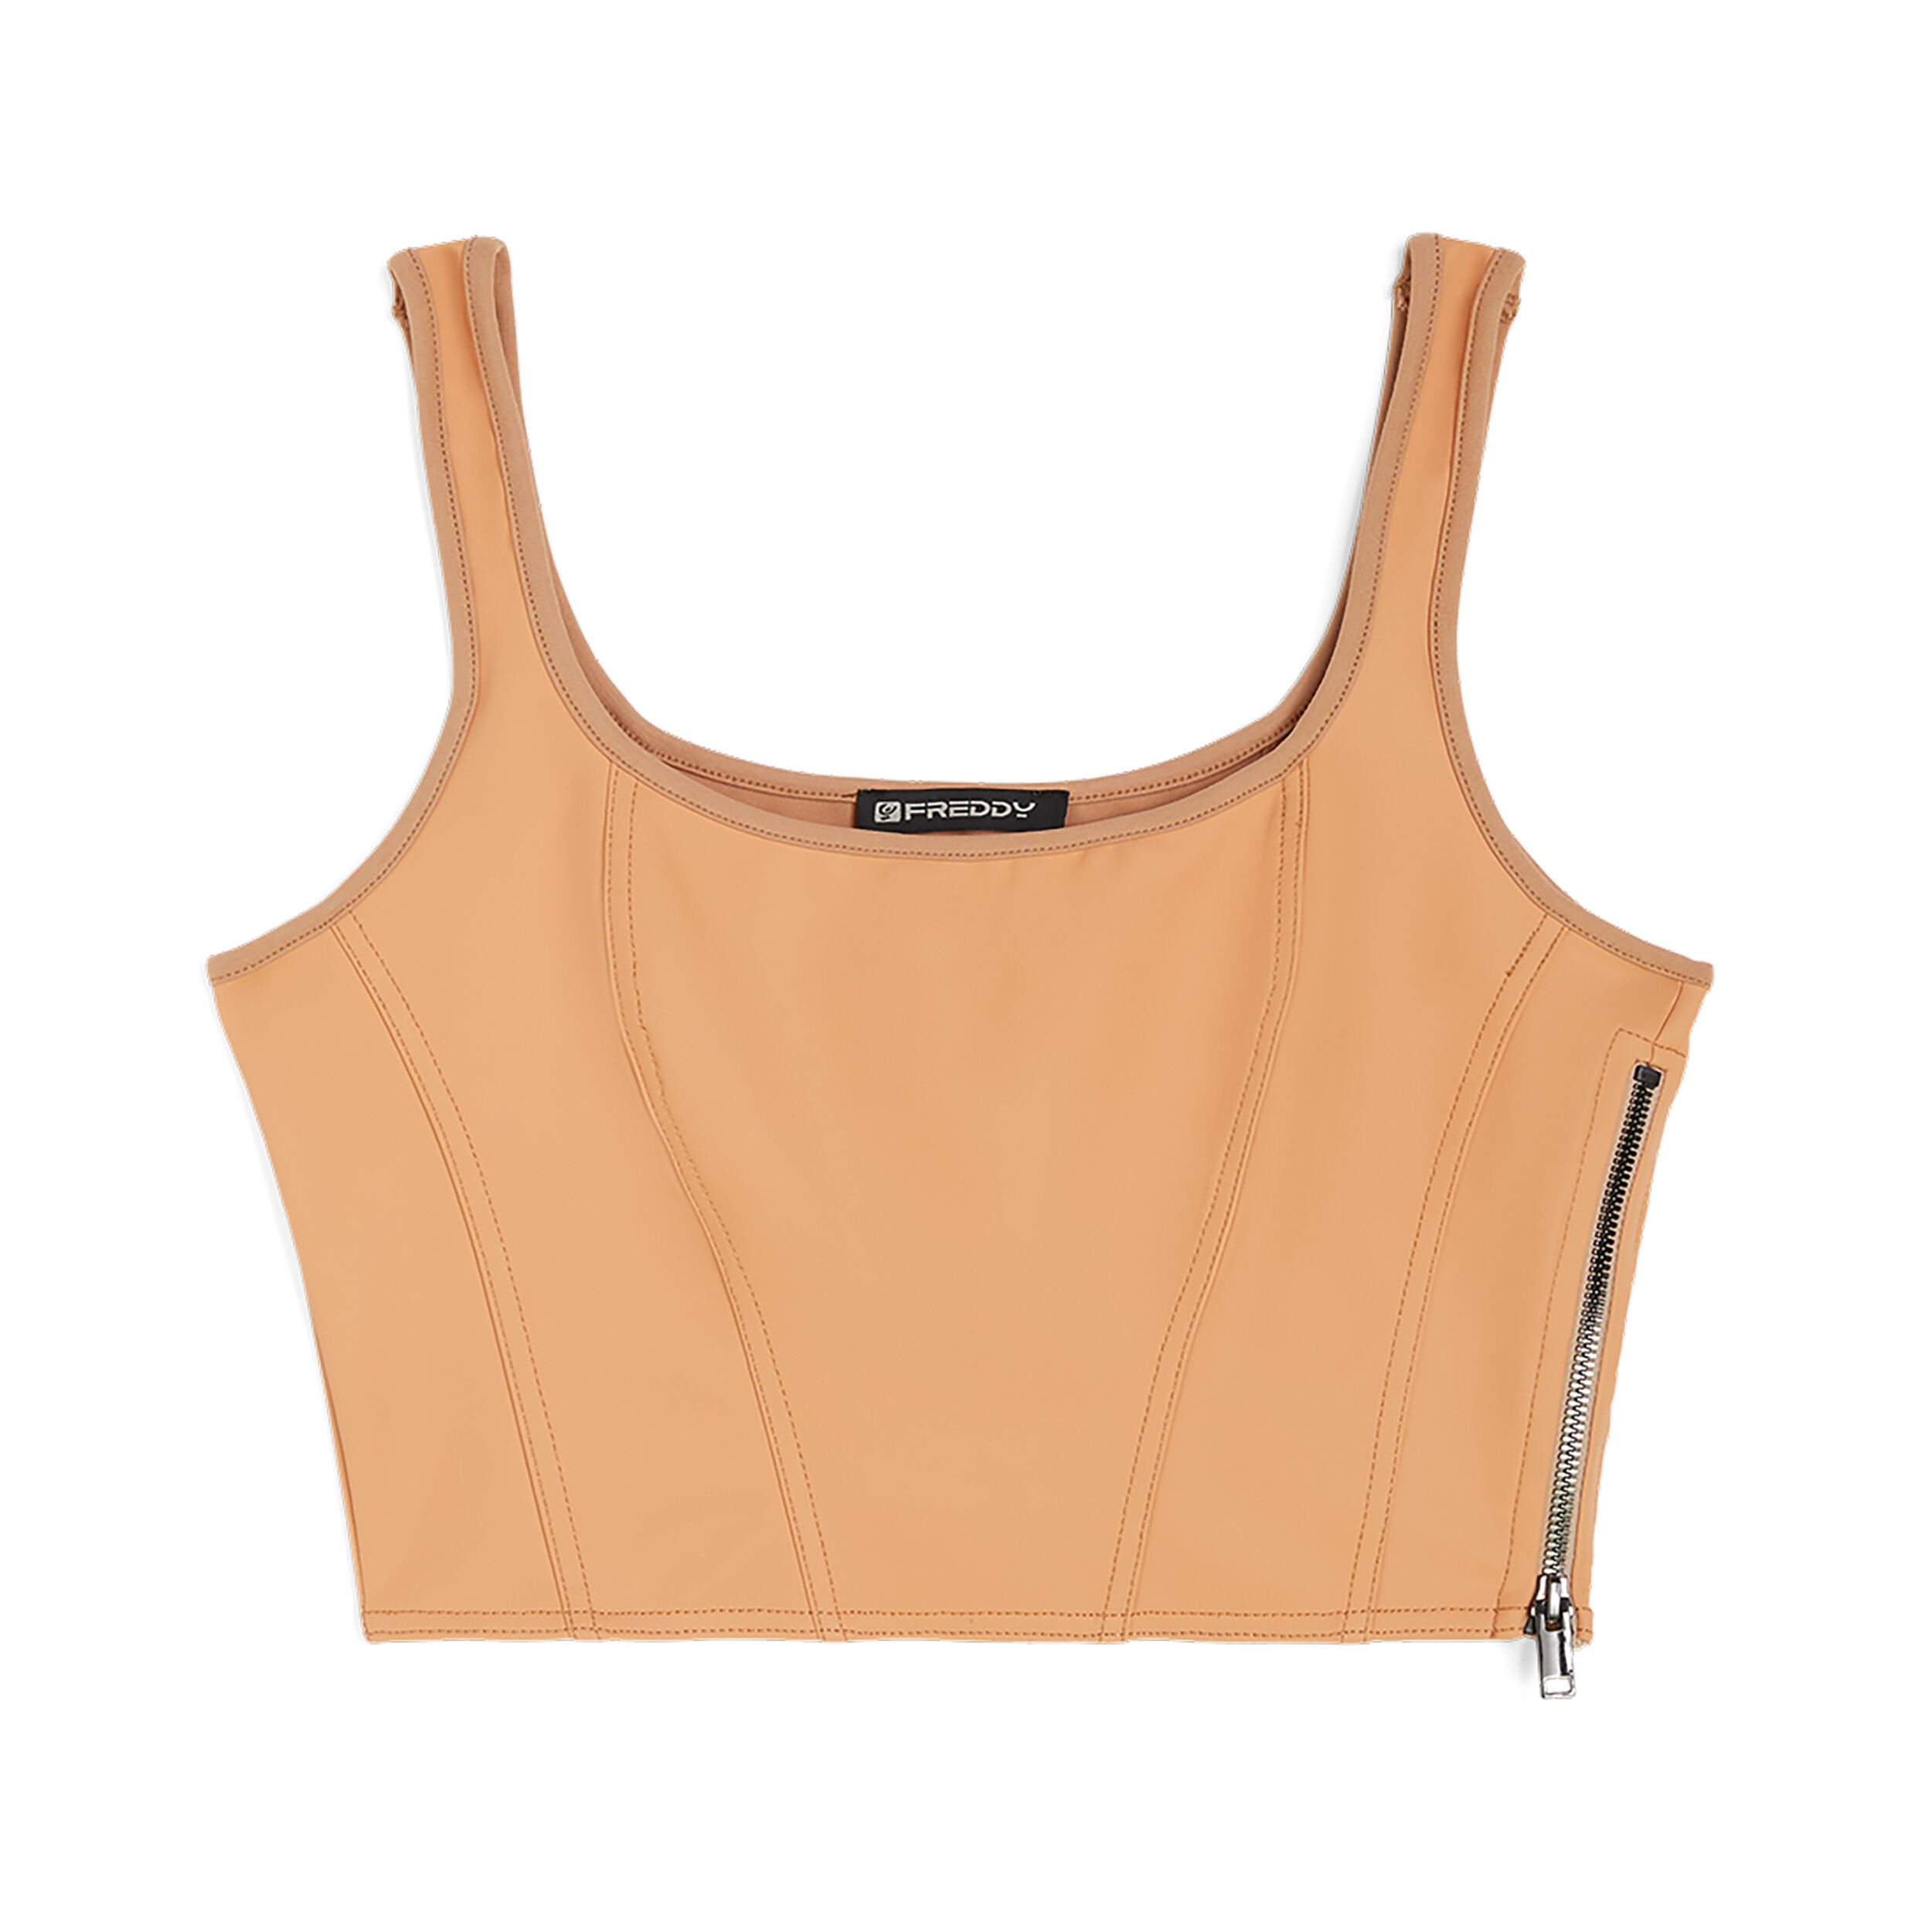 Freddy Top corto stile bustier in similpelle Macaroon Donna Large